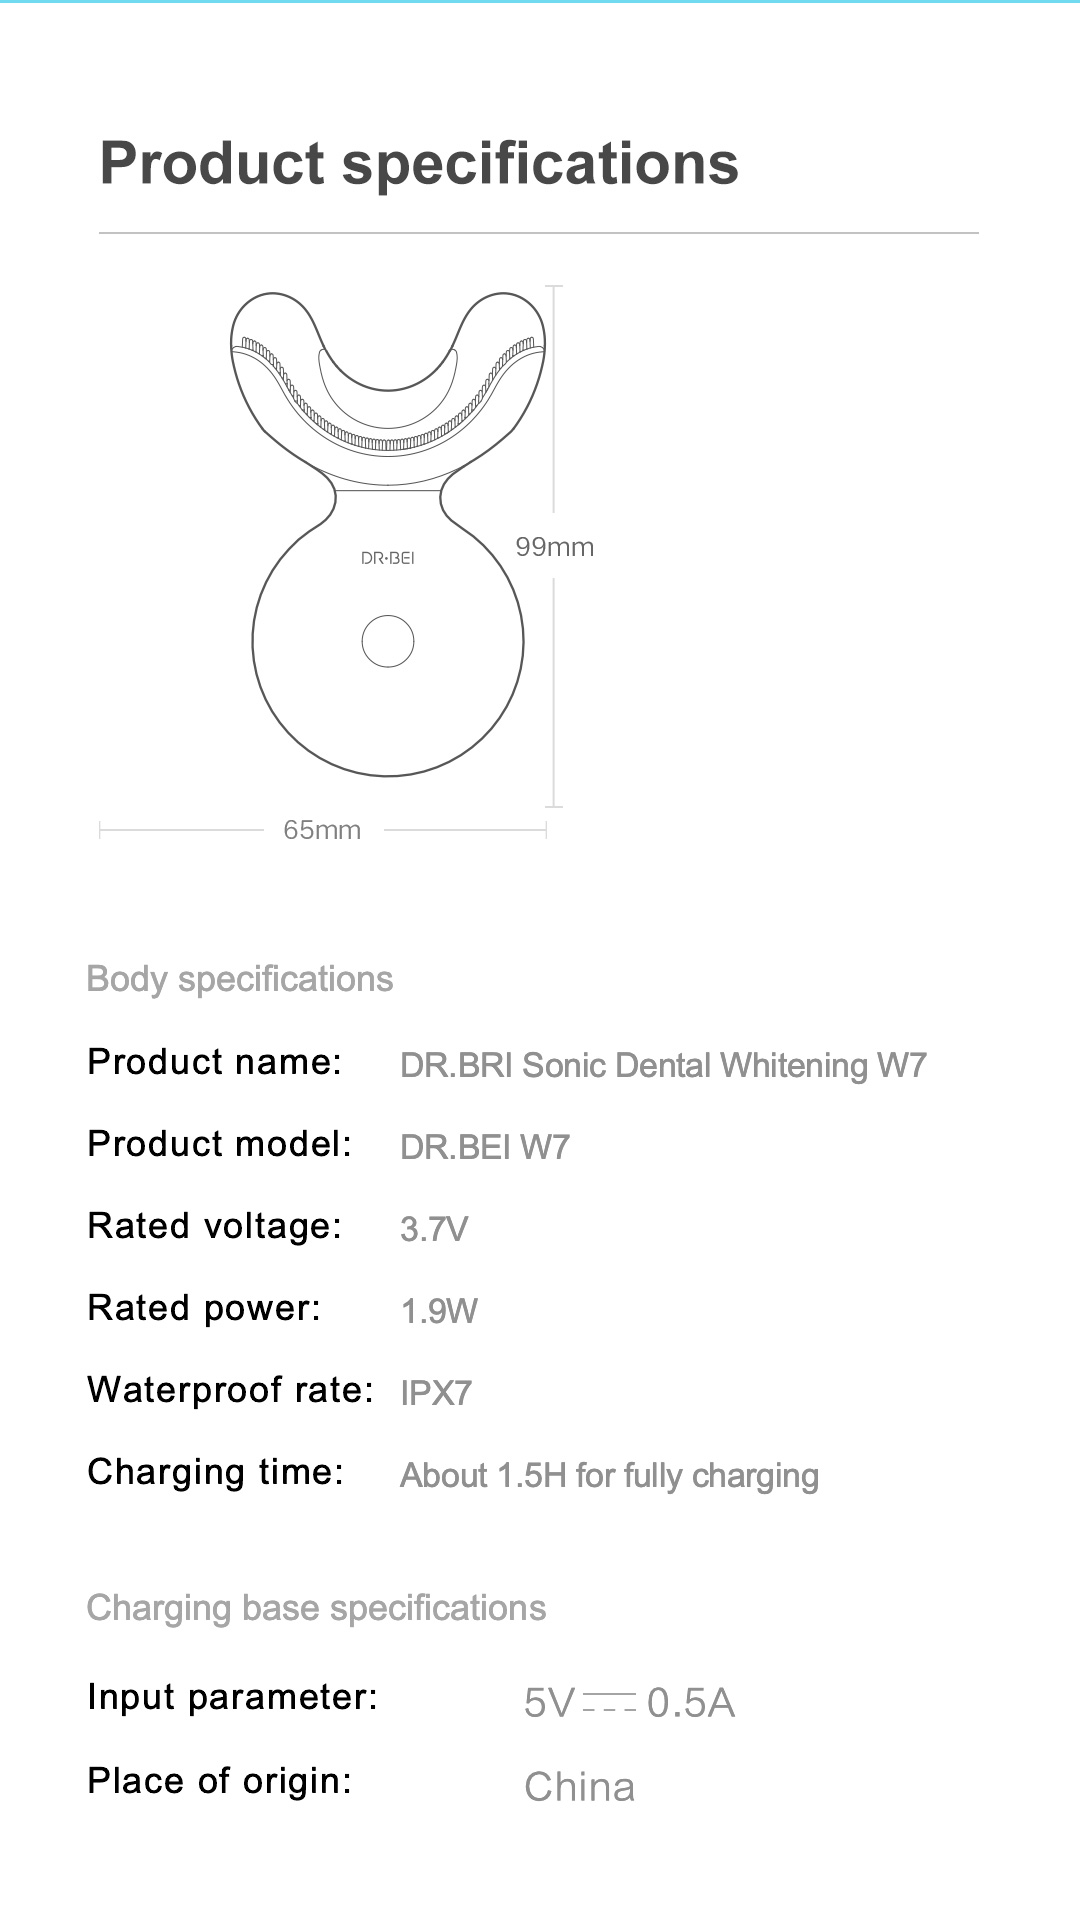 DR.BEI W7 Dental Whitening Gel, 4 Pieces Xiaomi Youpin DR.BEI W7 Dental Teeth Whitening Equipment Sonic Acoustic Oral Care Beautifier IPX7 Waterproof Tooth Whitening Cleaning Tools